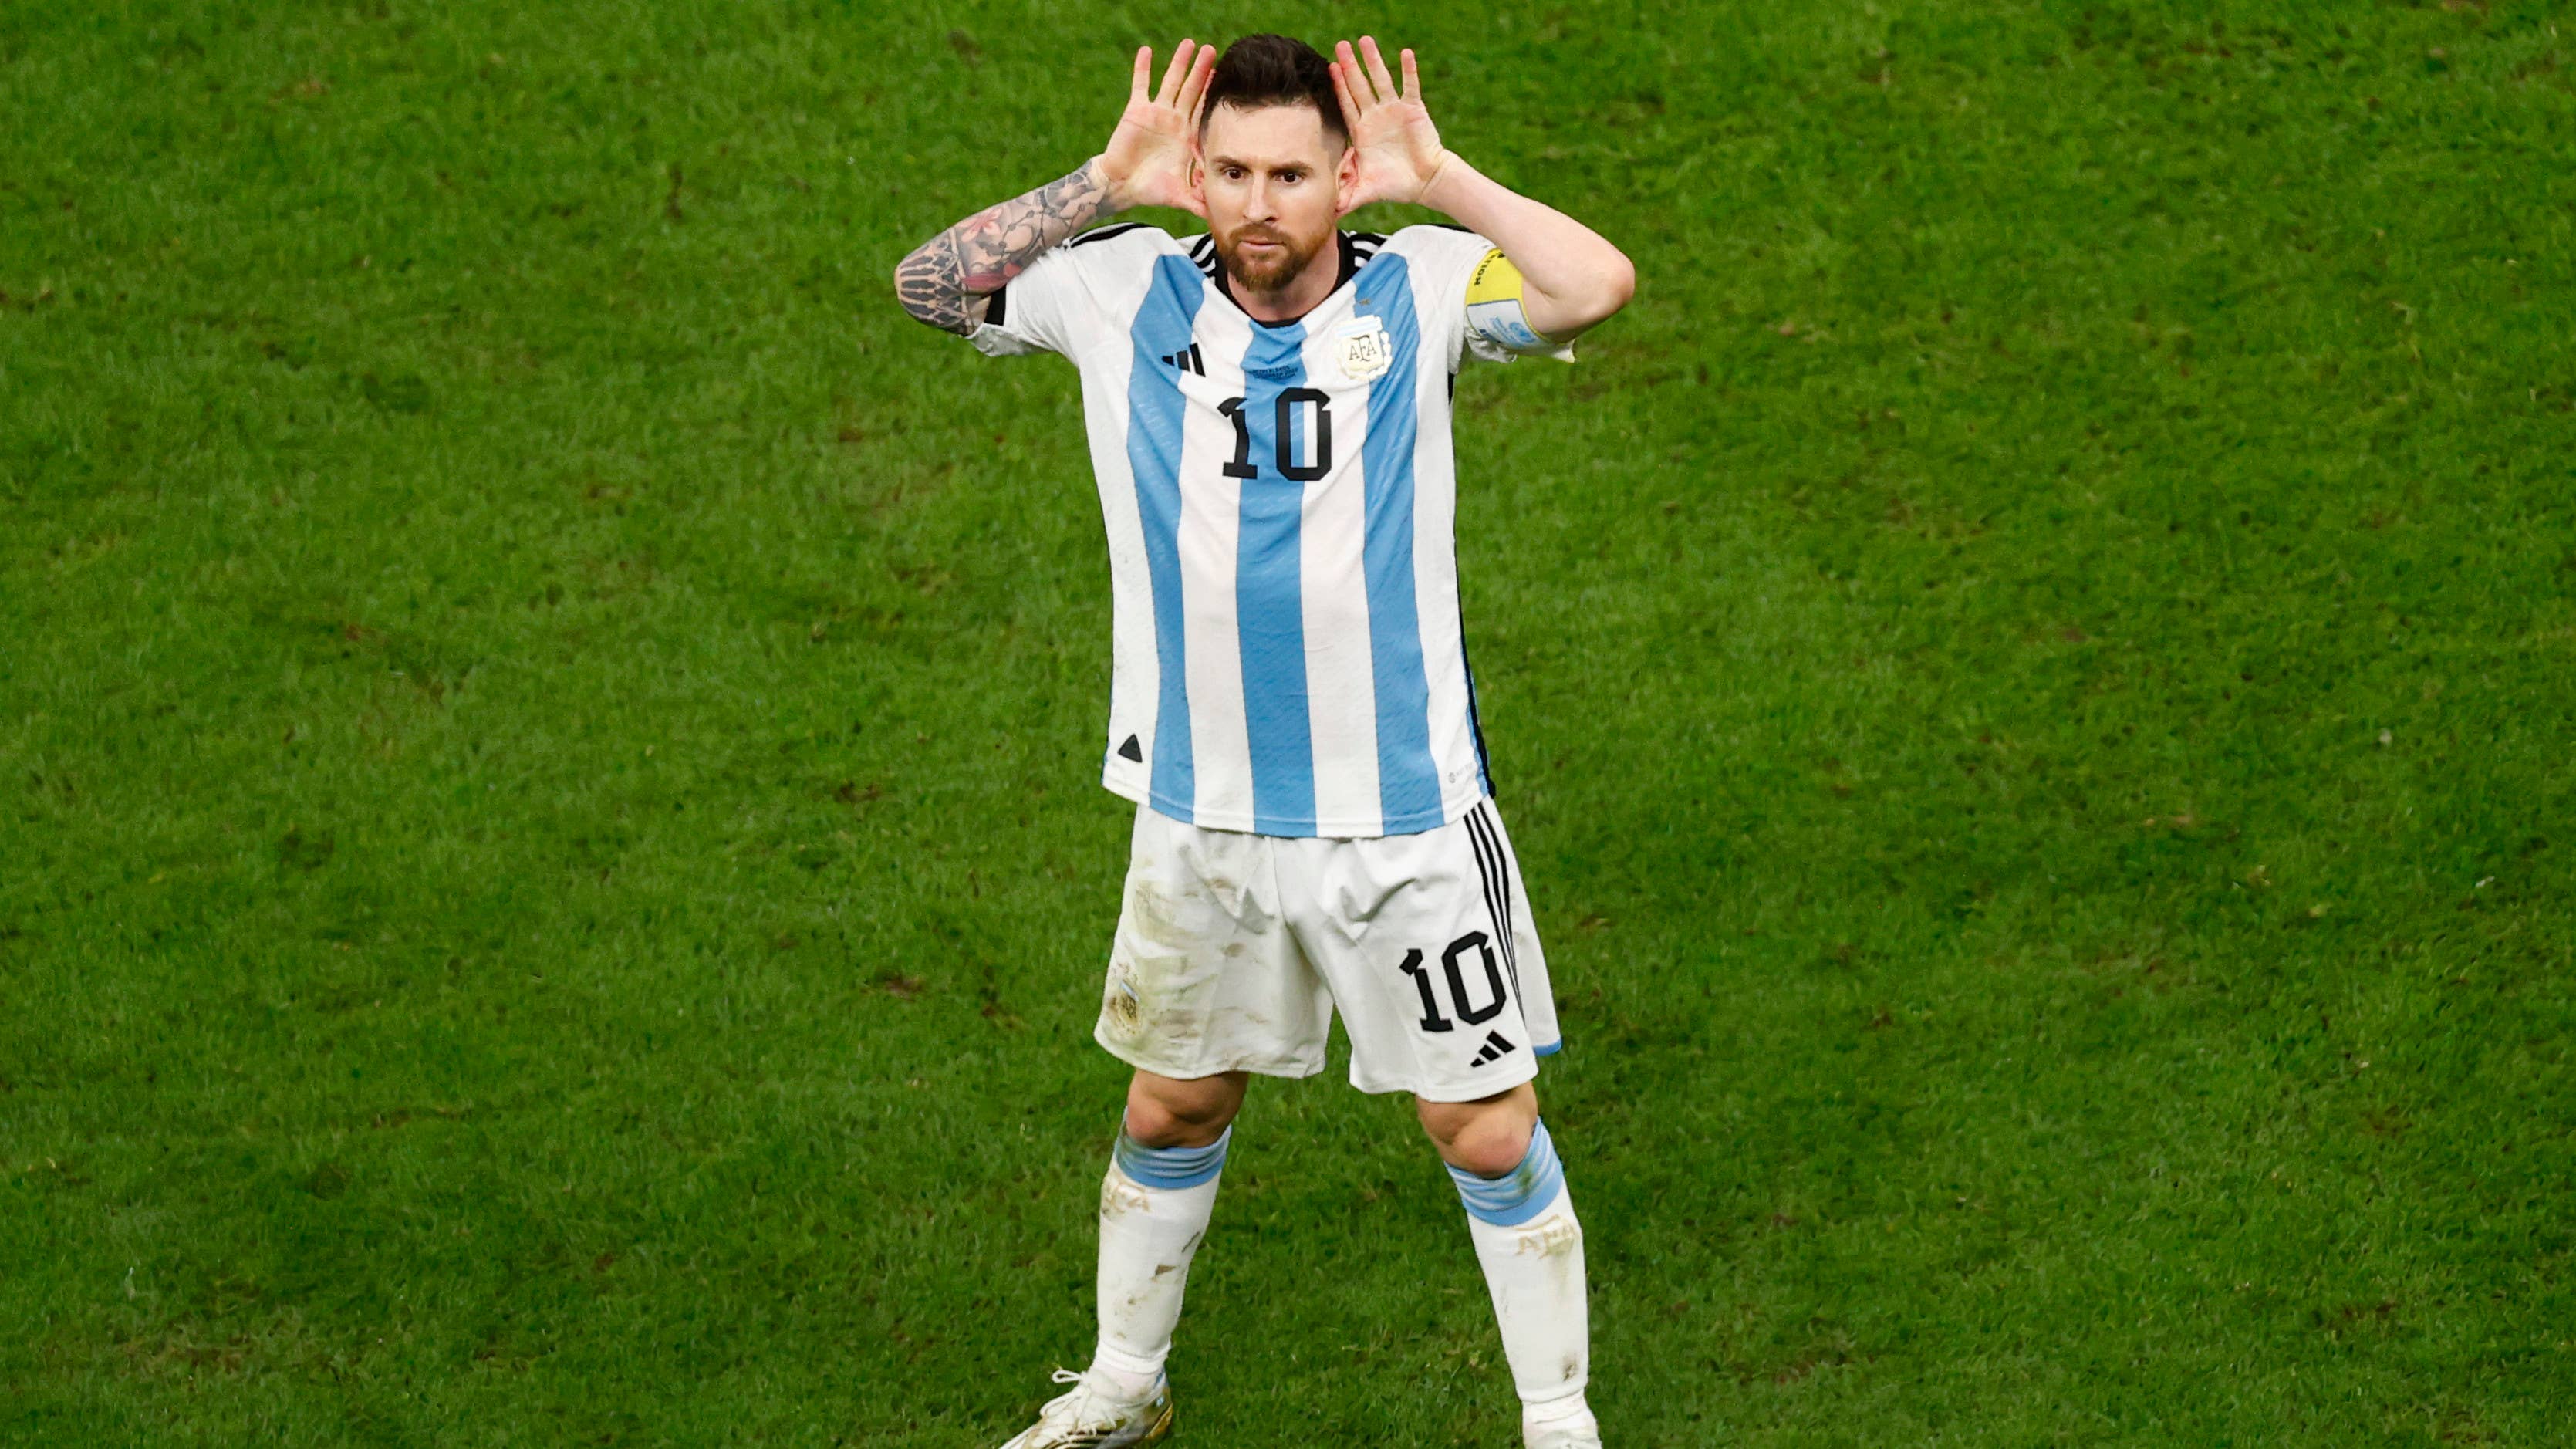 Messi celebrates goal during World Cup match against Netherlands